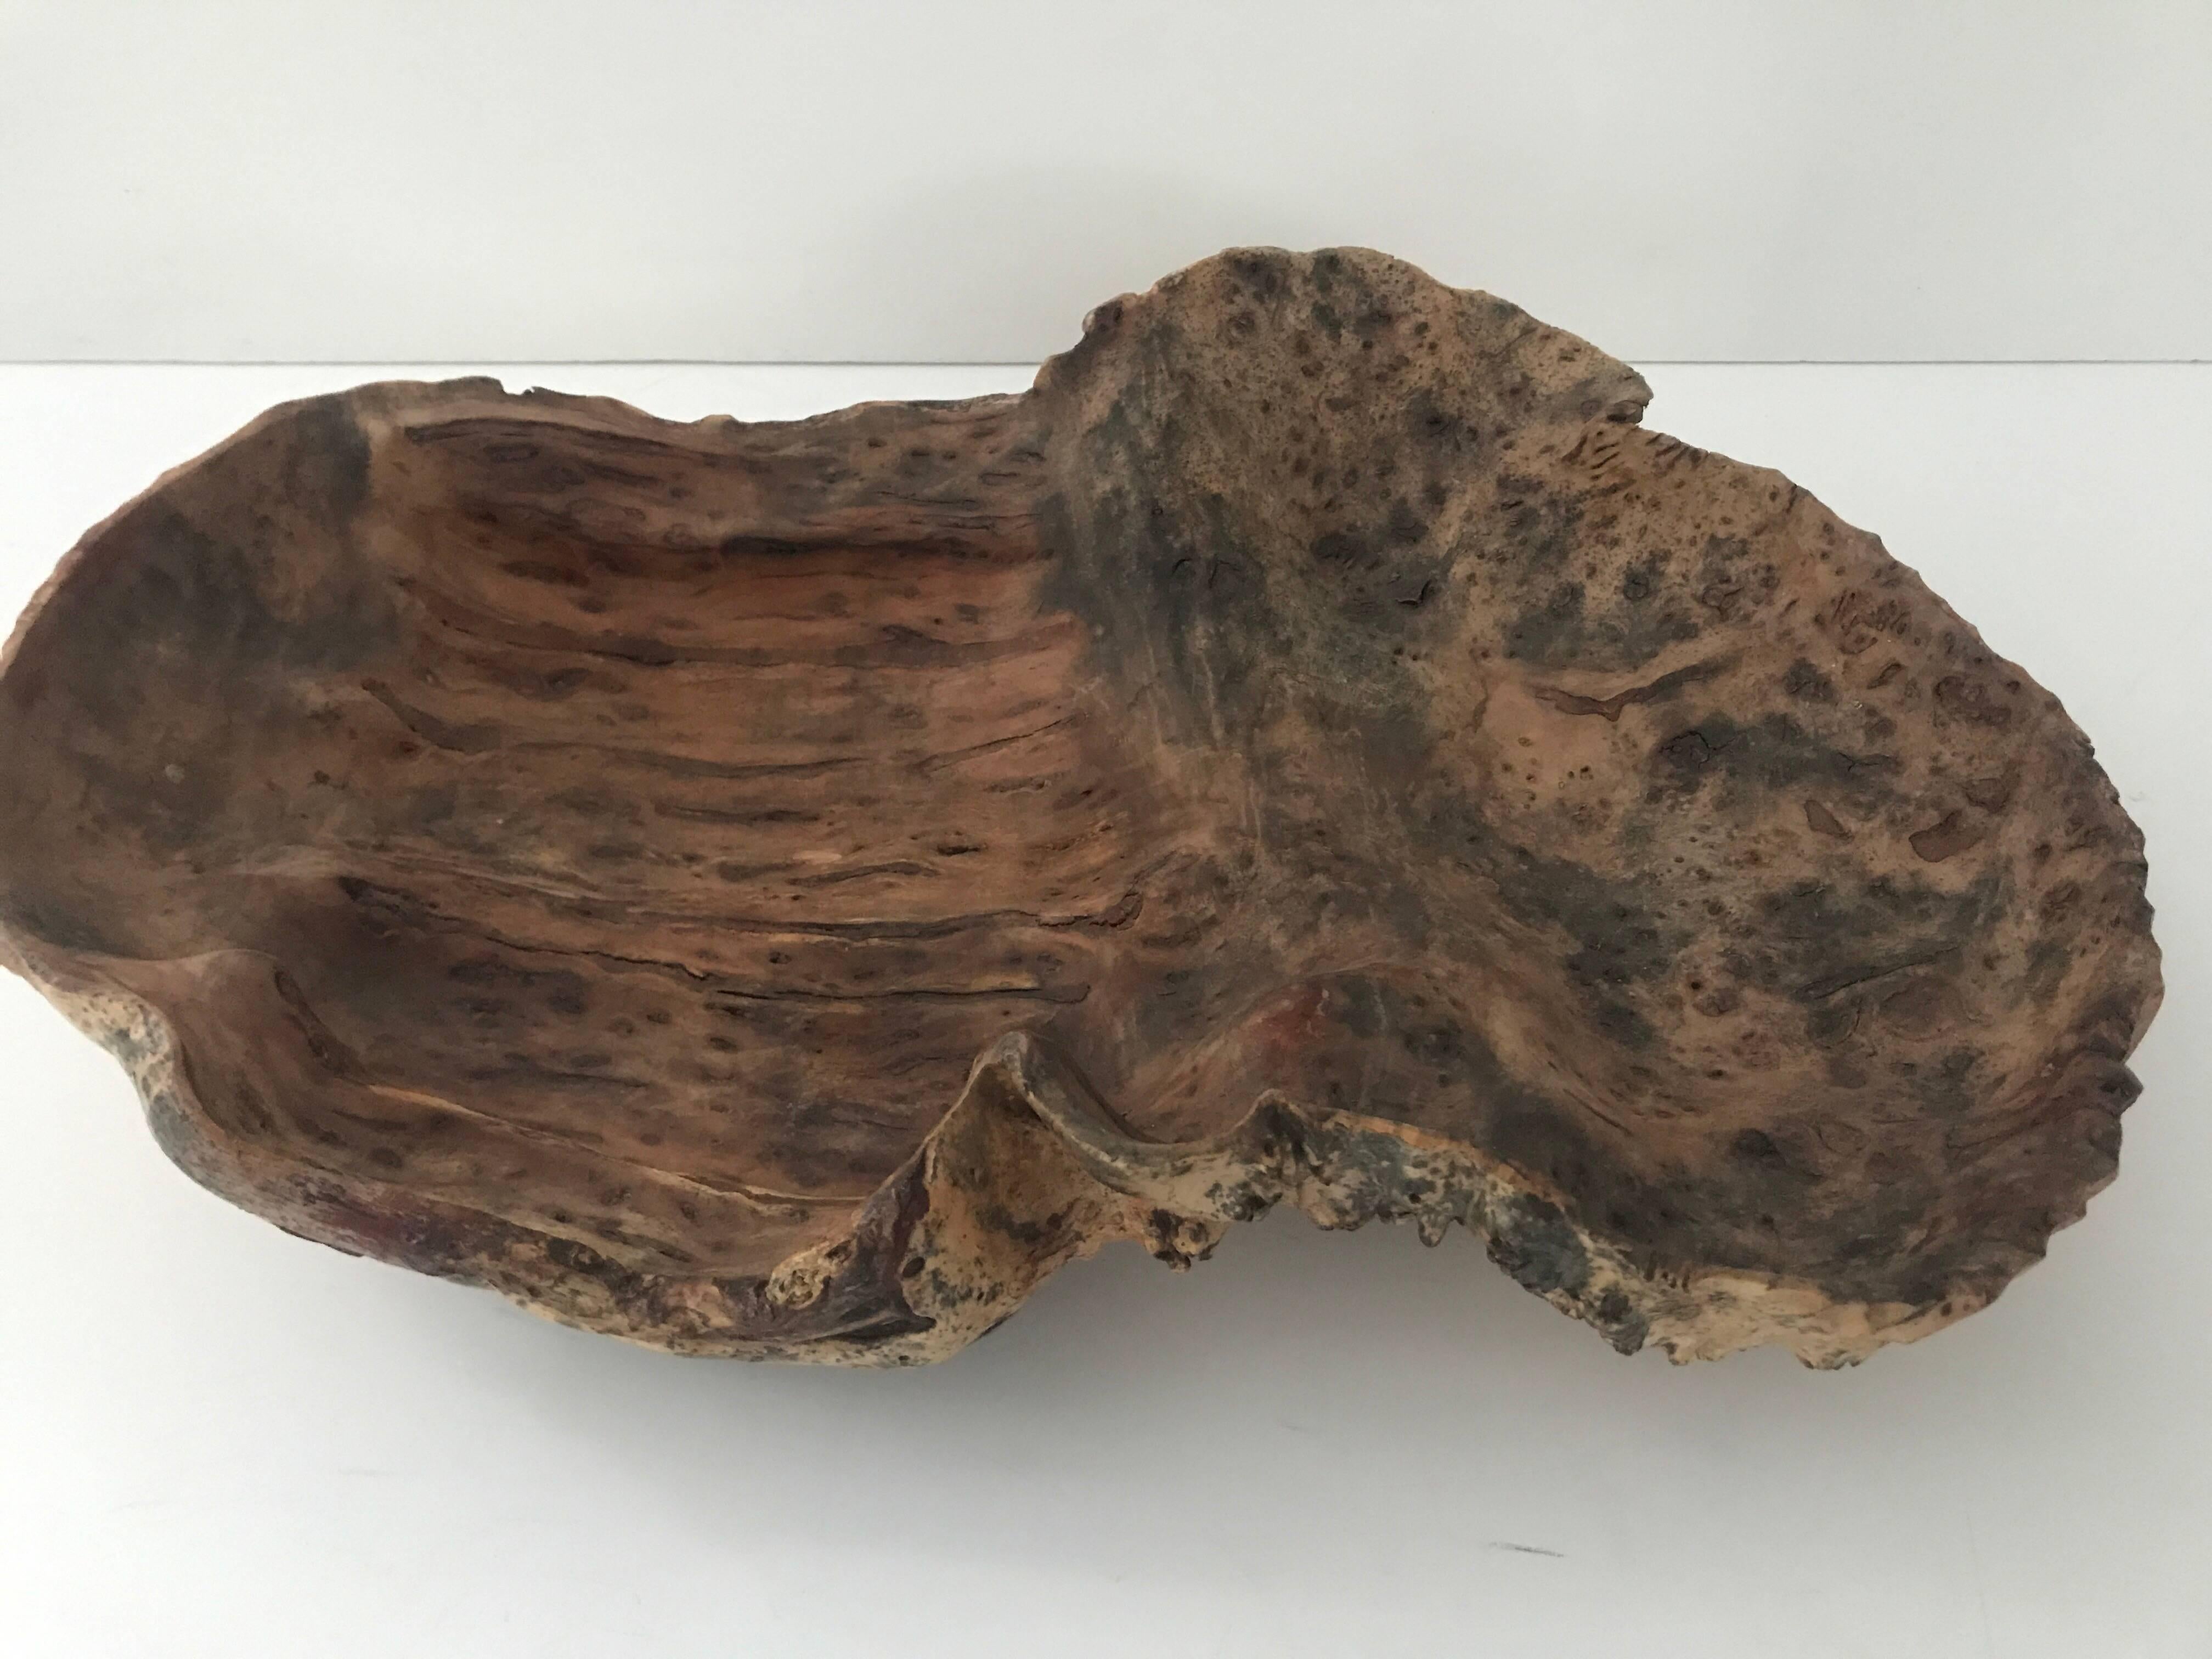 Large Swedish Northern hand-carved birch burl bowl.
A very beautiful hand-carved birch bowl, most likely made by the Sami people in northern Sweden. This bowl is very large and have a beautiful patina. It has been made with great artistic skill.